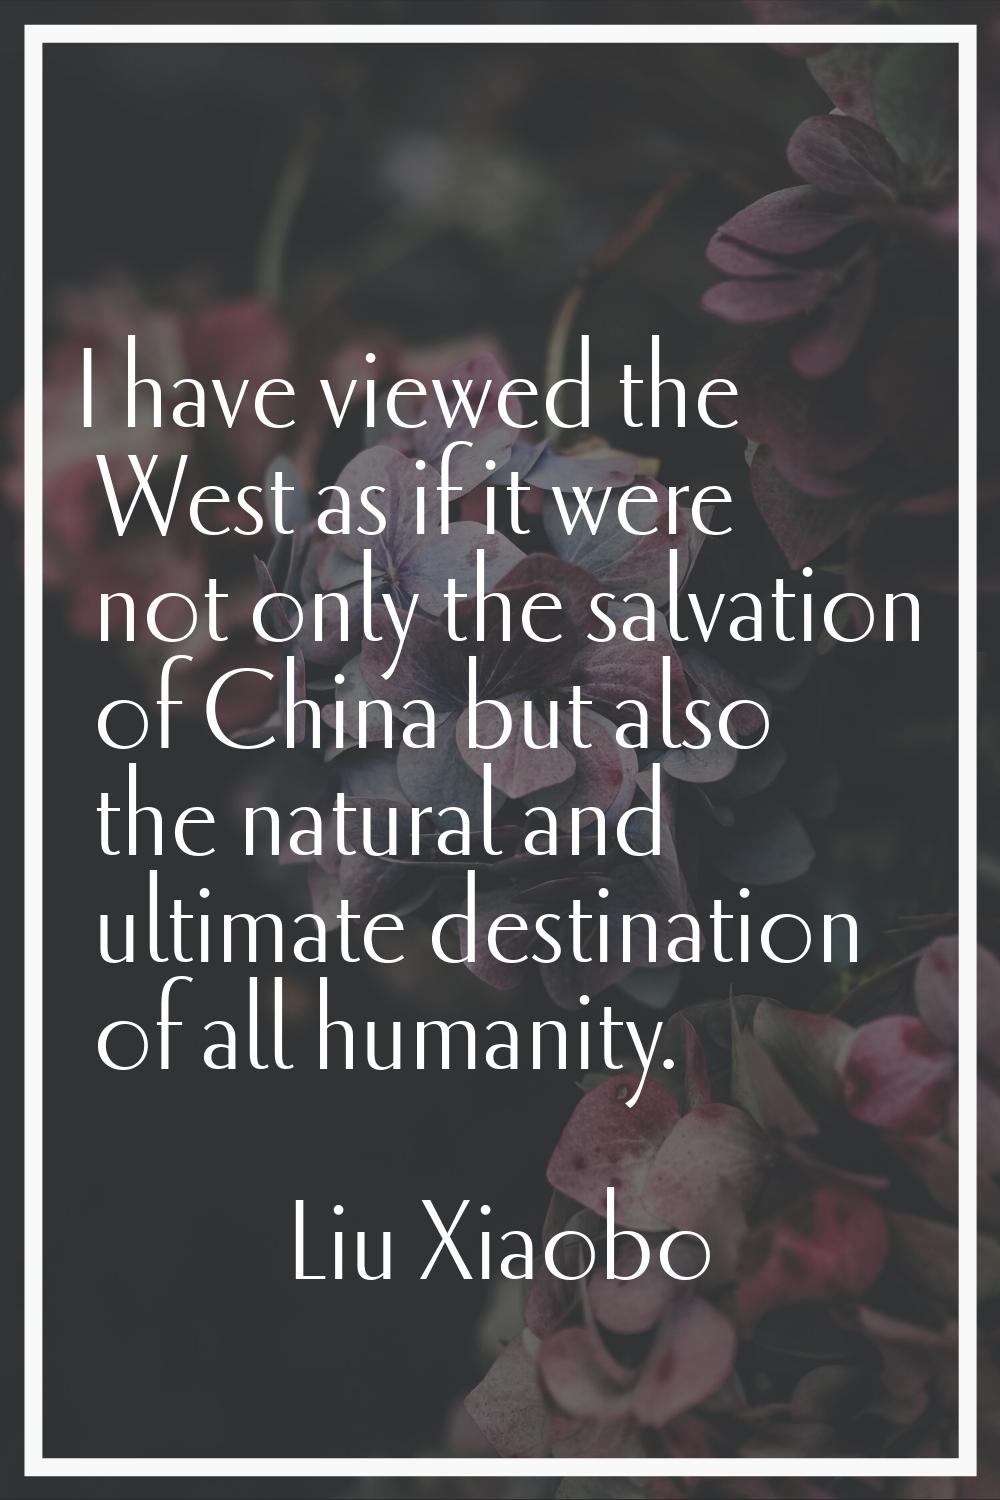 I have viewed the West as if it were not only the salvation of China but also the natural and ultim